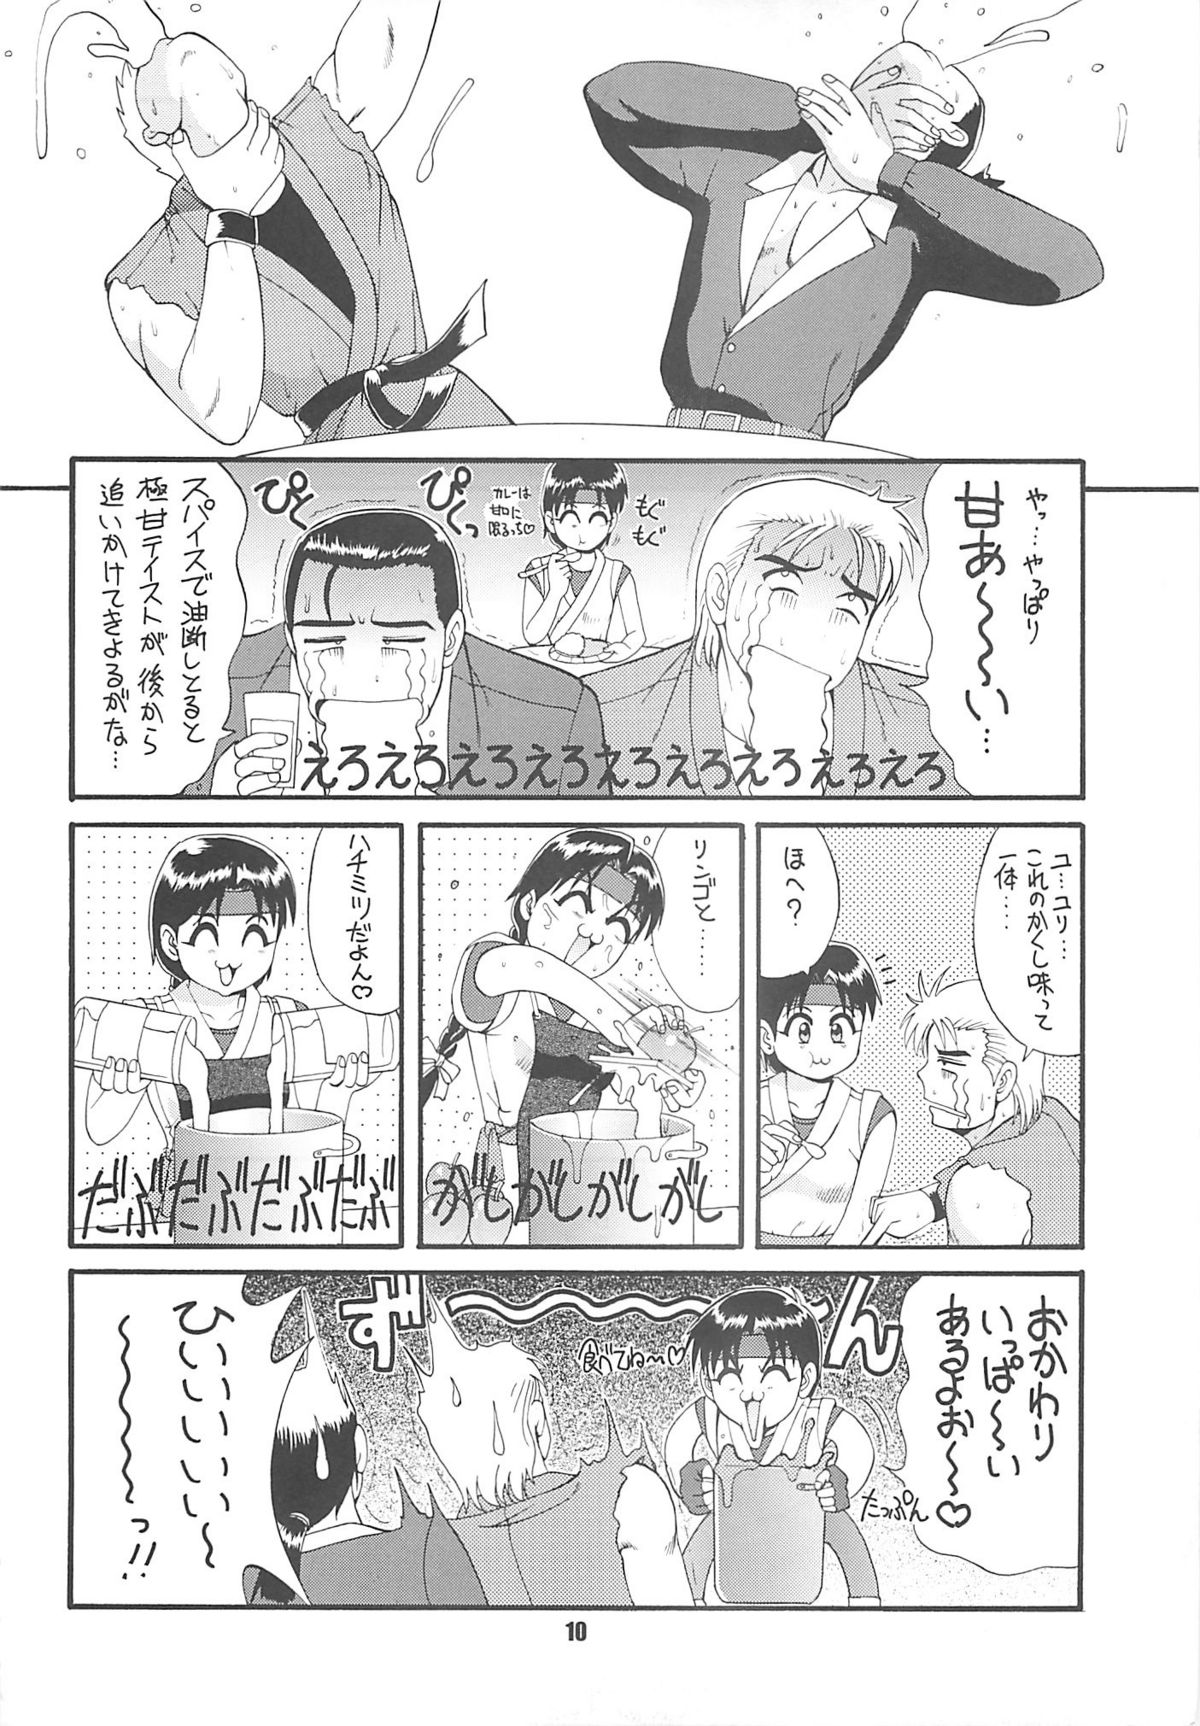 (CR22) [Saigado (Ishoku Dougen)] The Yuri & Friends '97 (King of Fighters) page 9 full